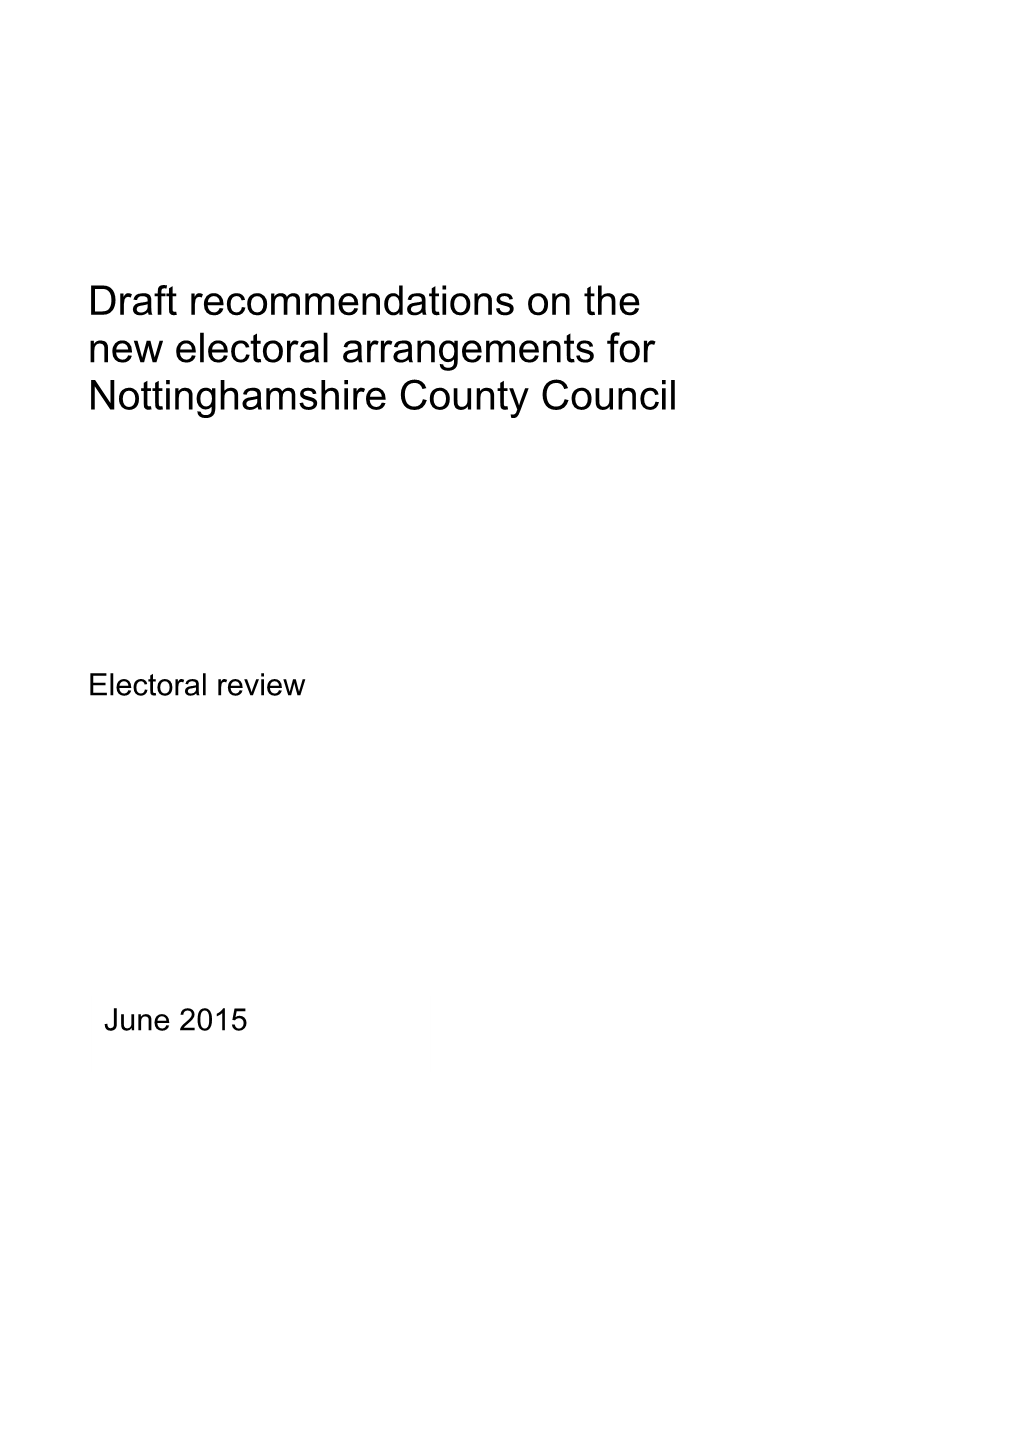 Draft Recommendations on the New Electoral Arrangements for Nottinghamshire County Council